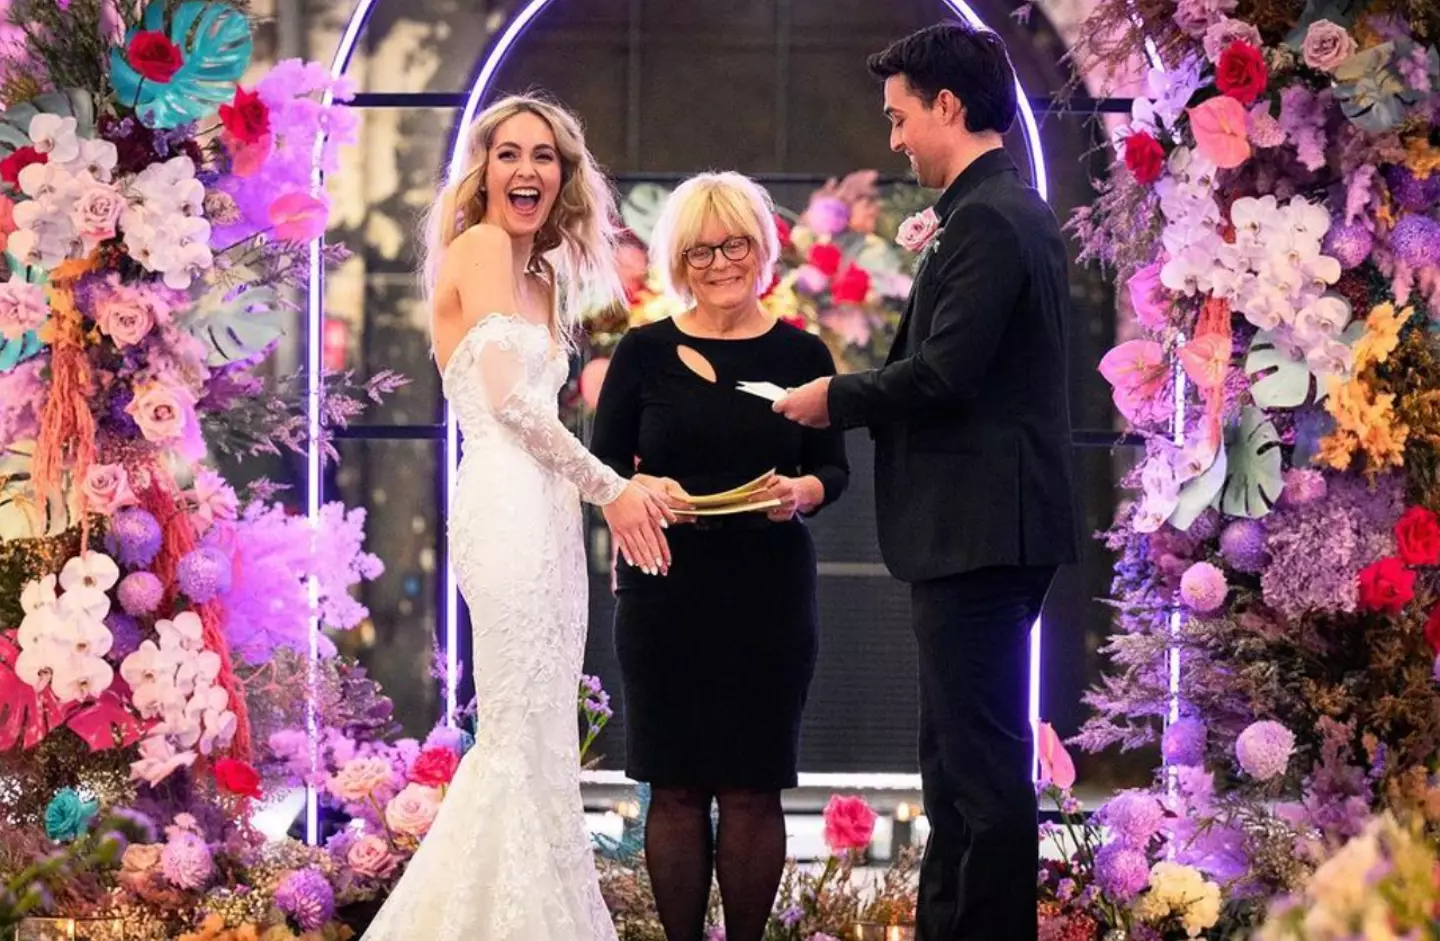 The pair got married on the show.